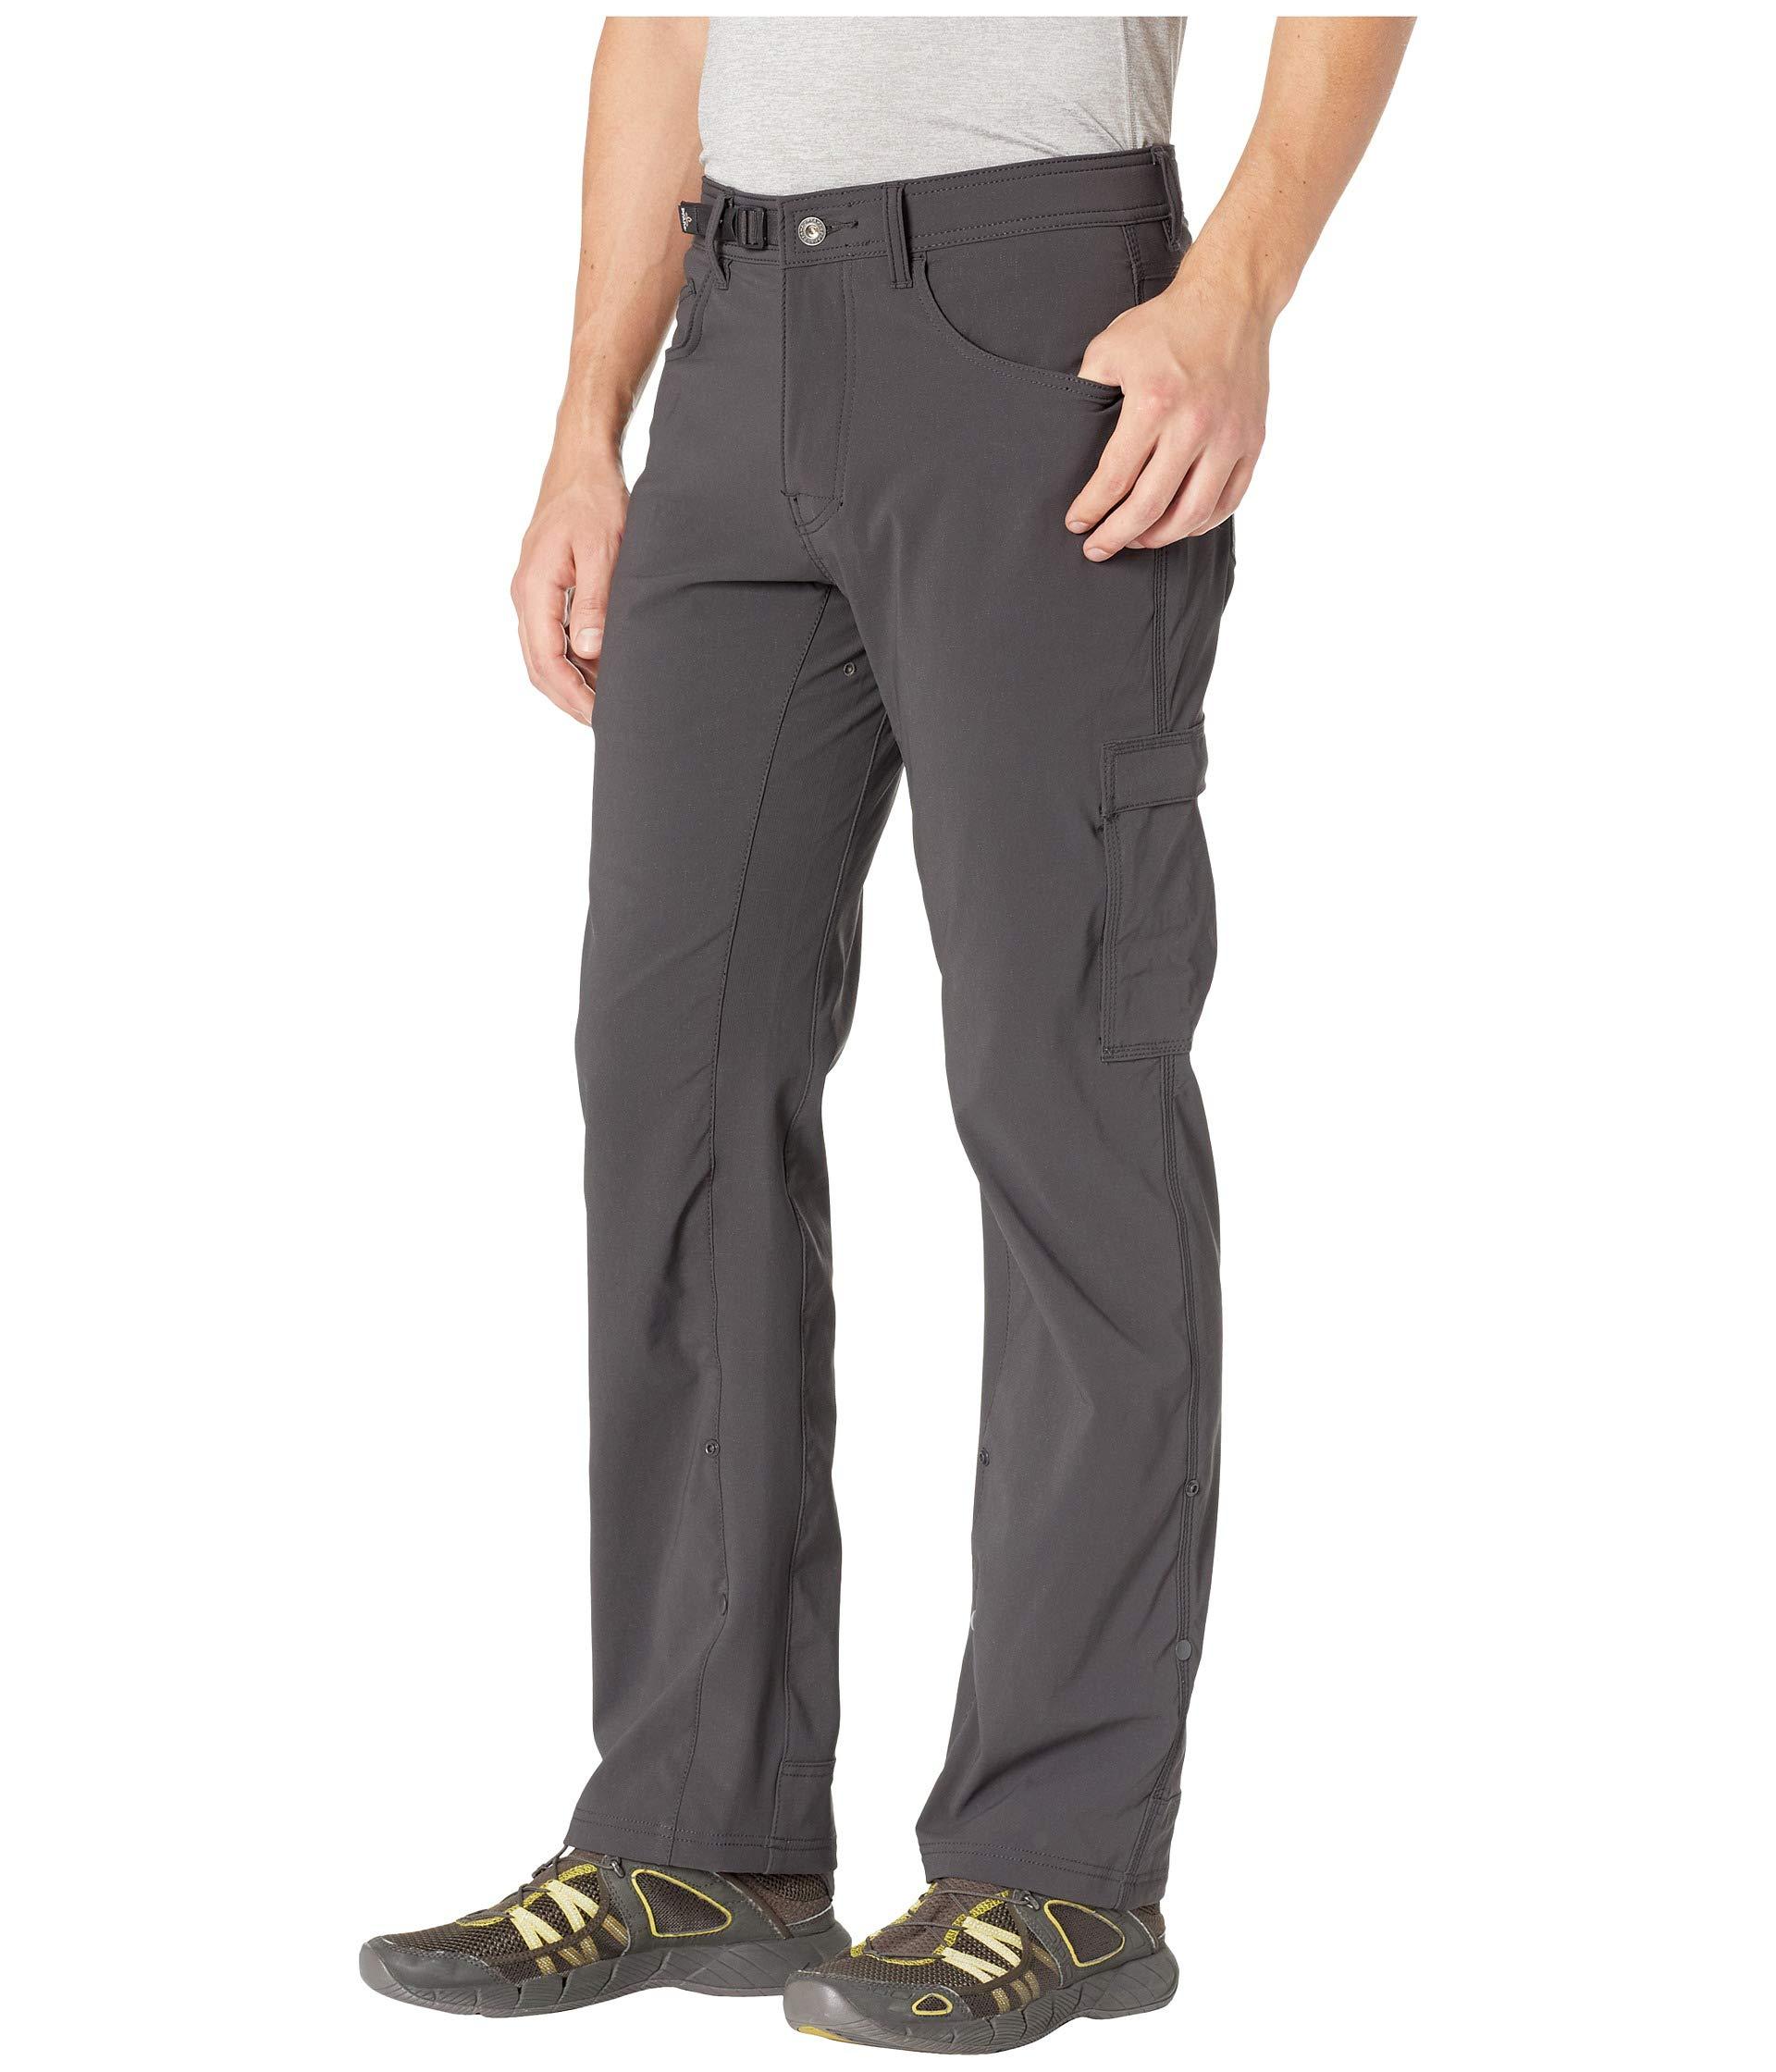 Prana Synthetic Stretch Zion Straight Pants in Gray for Men - Lyst